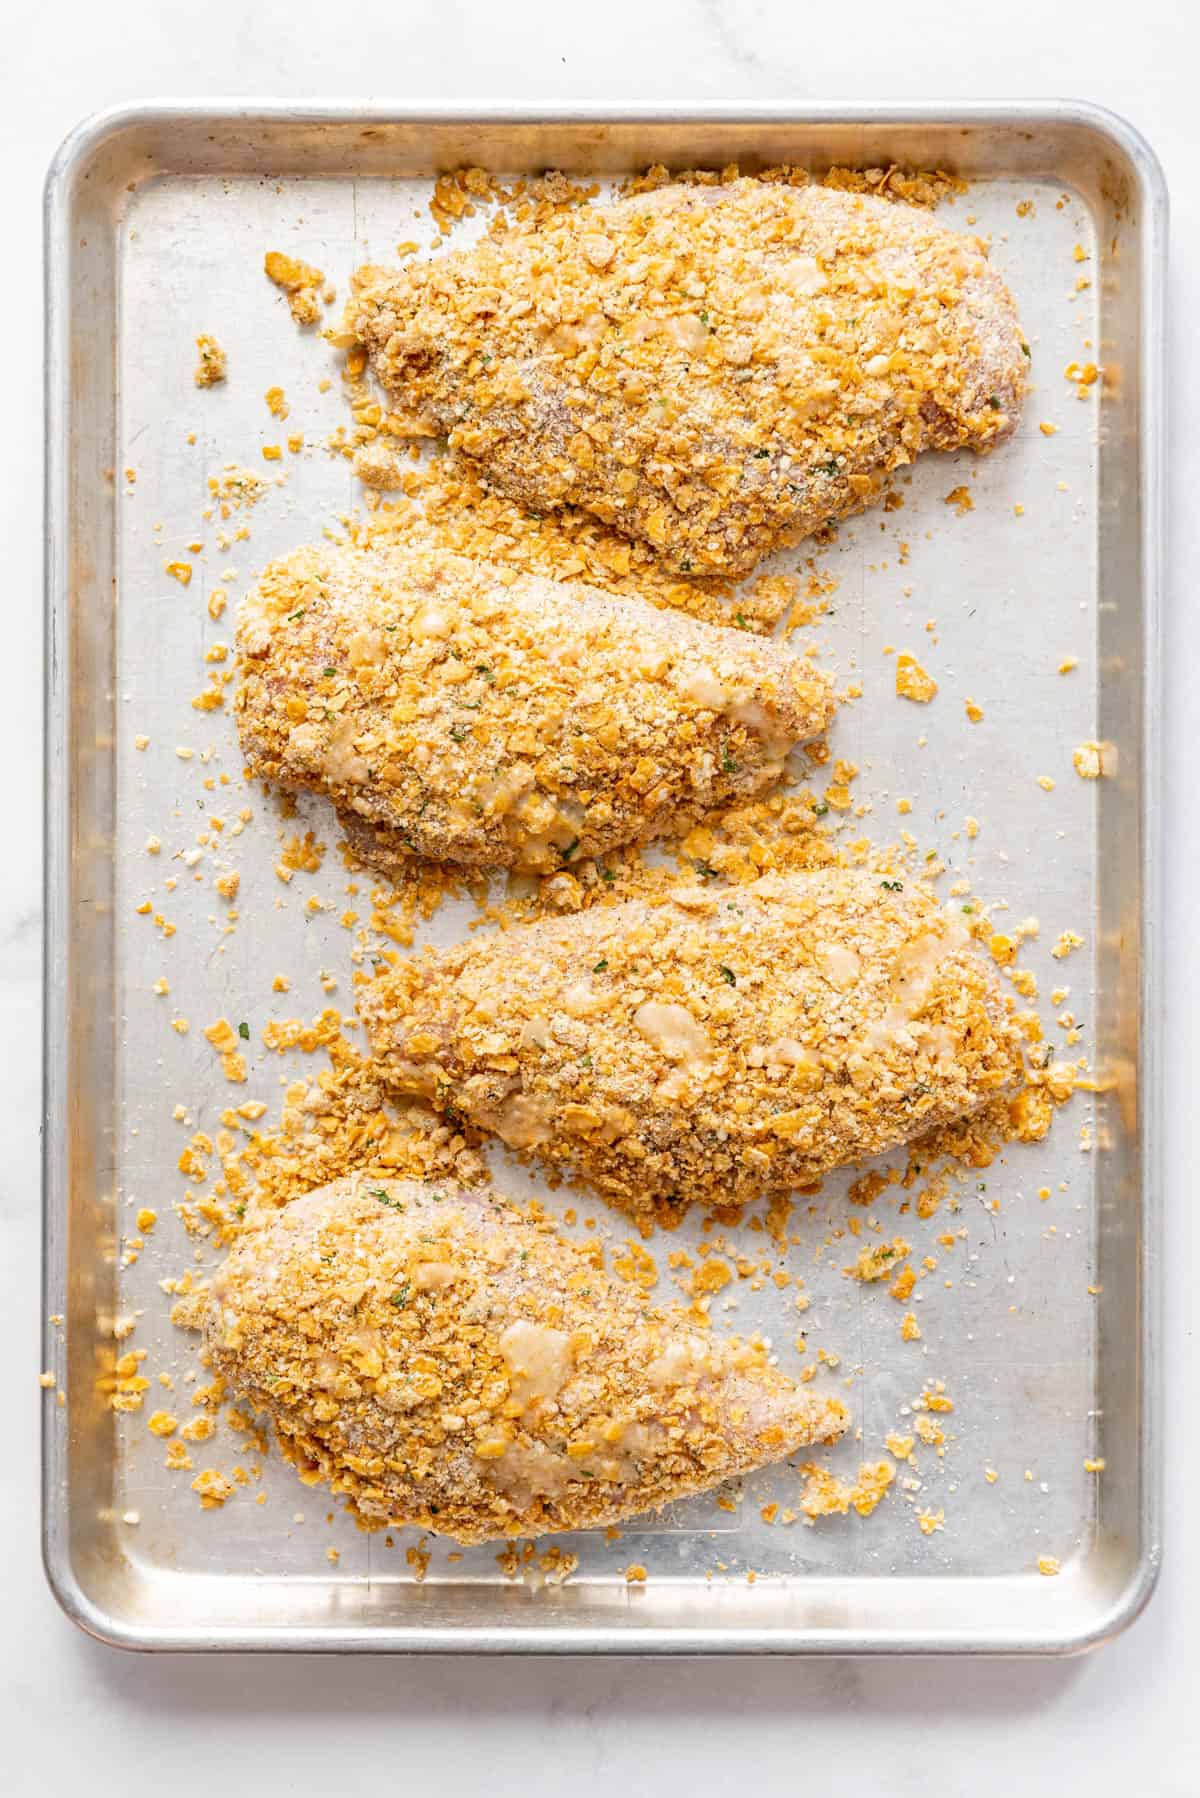 Four breaded chicken breasts on a baking sheet ready to go into the oven.